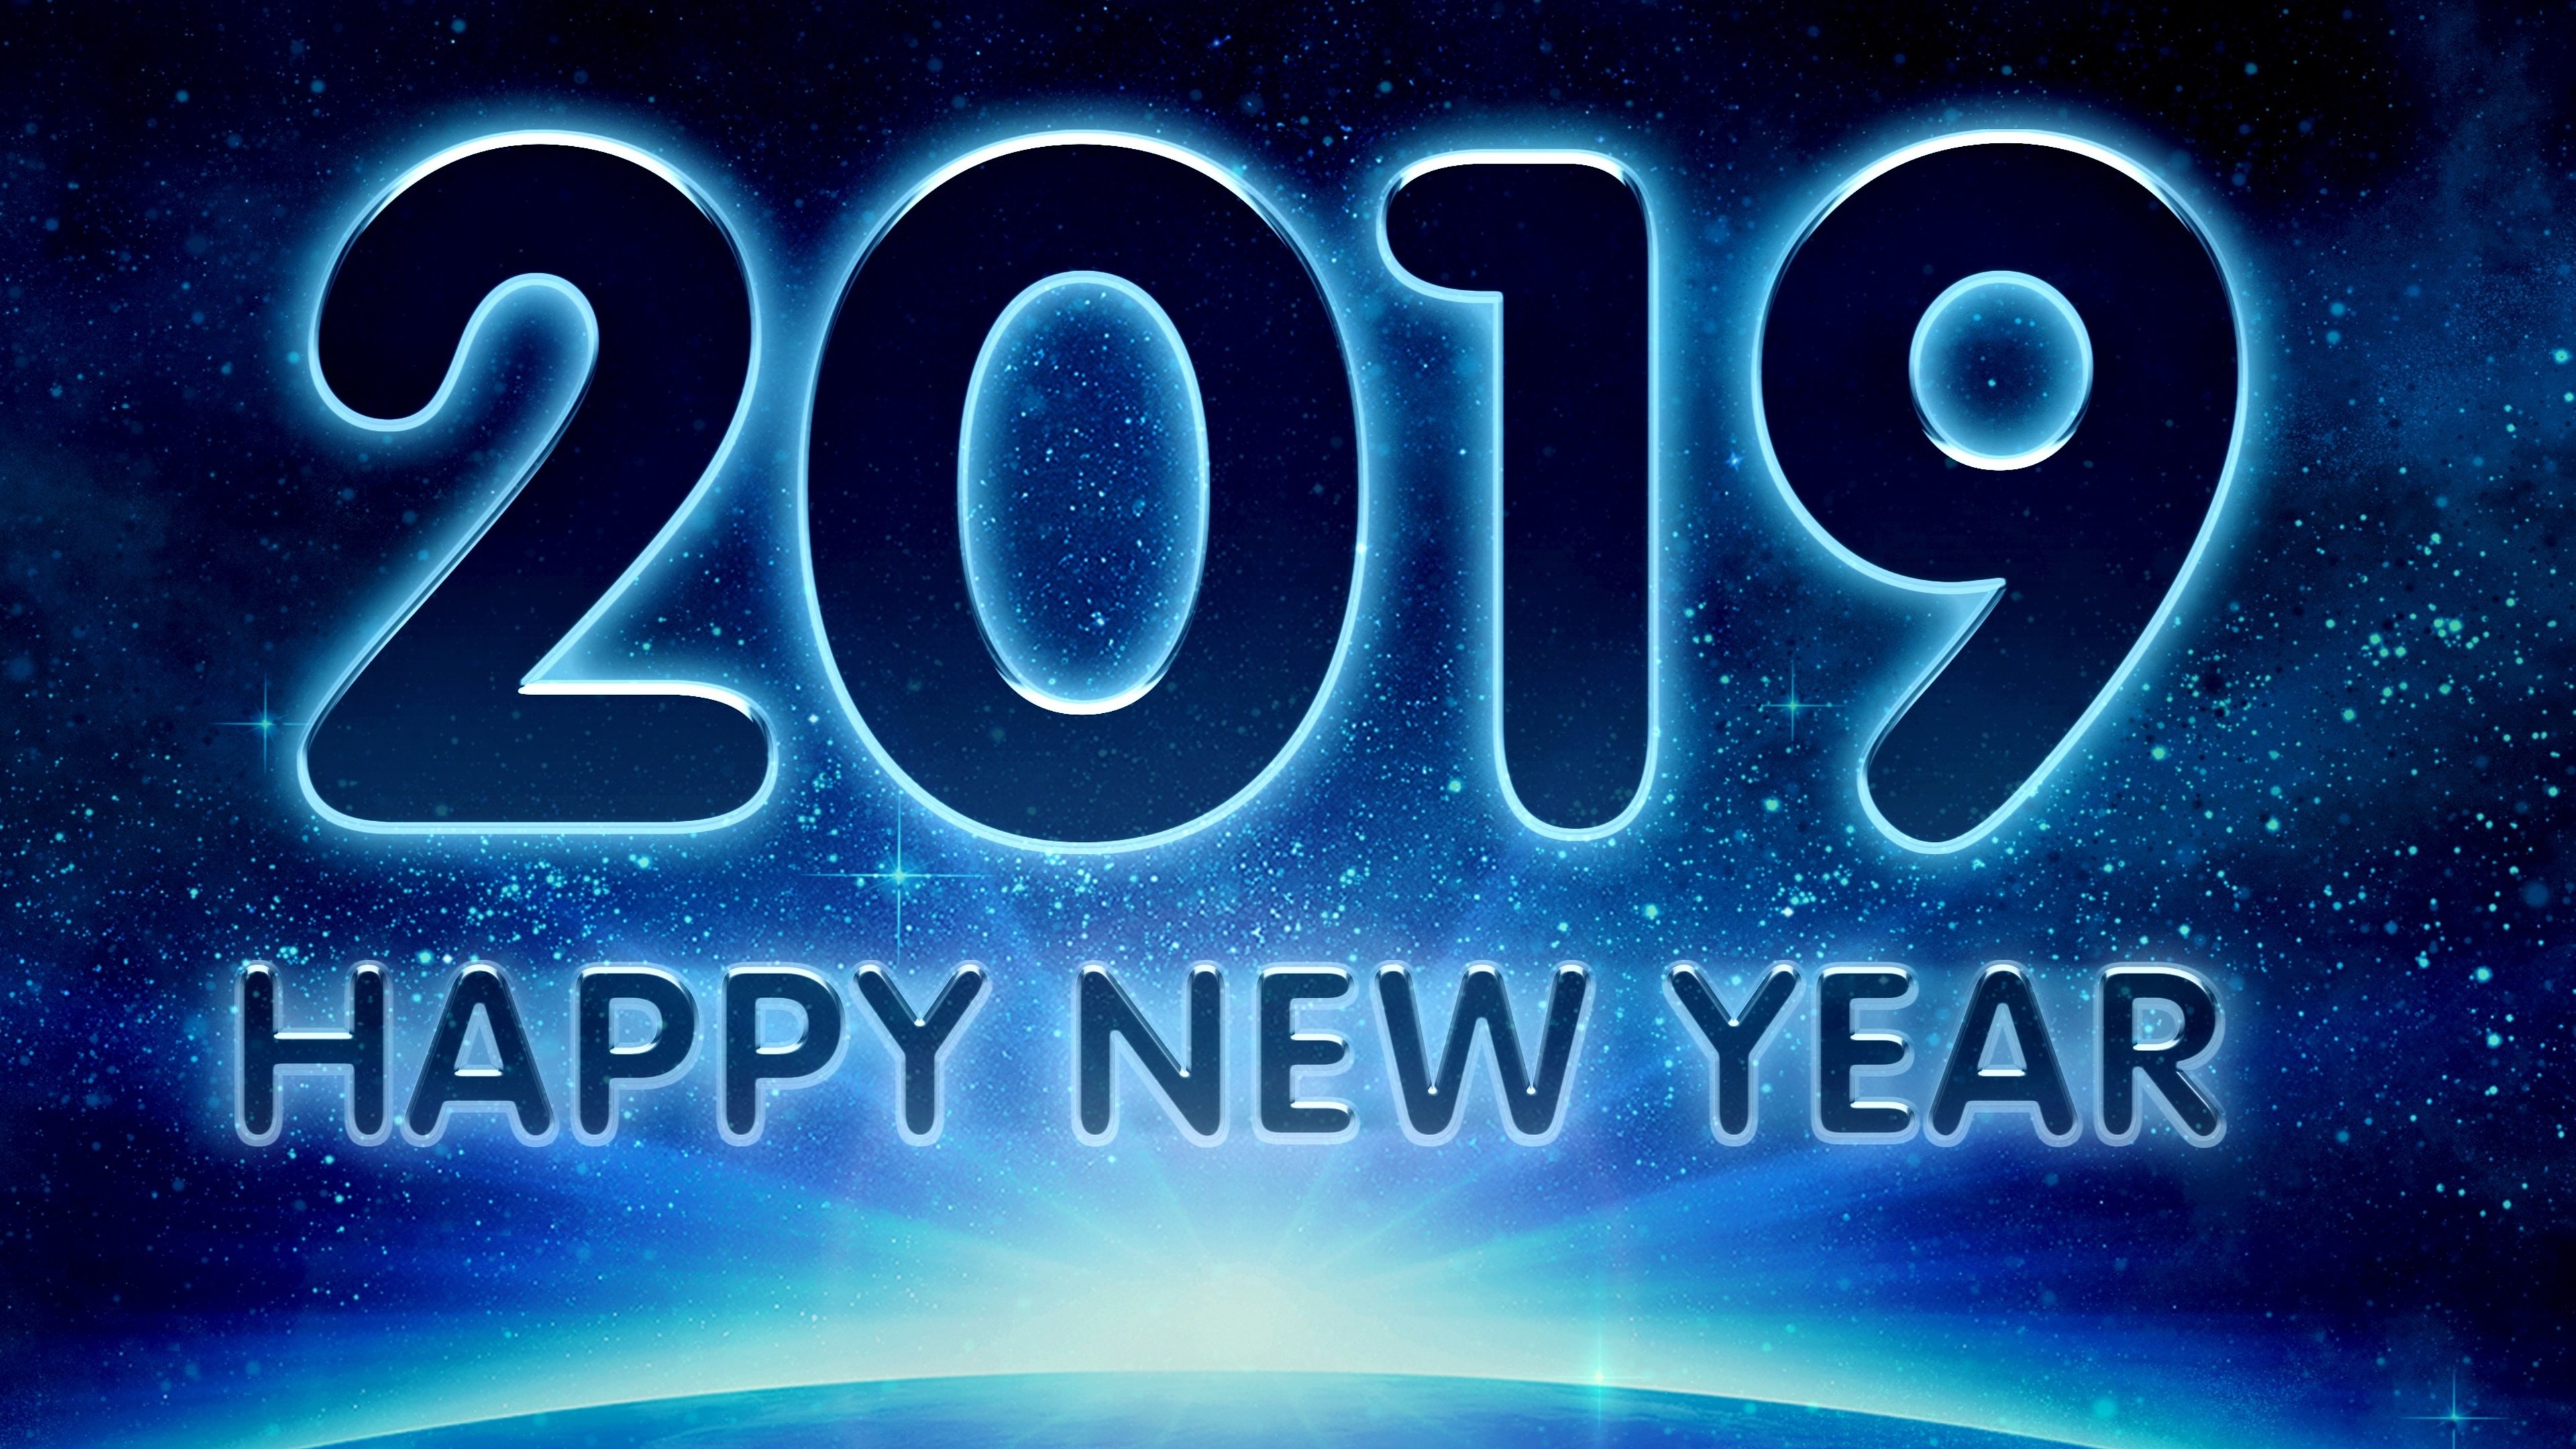 3840x2160 4K 2019 New Year Space Planet Wallpaper 38447